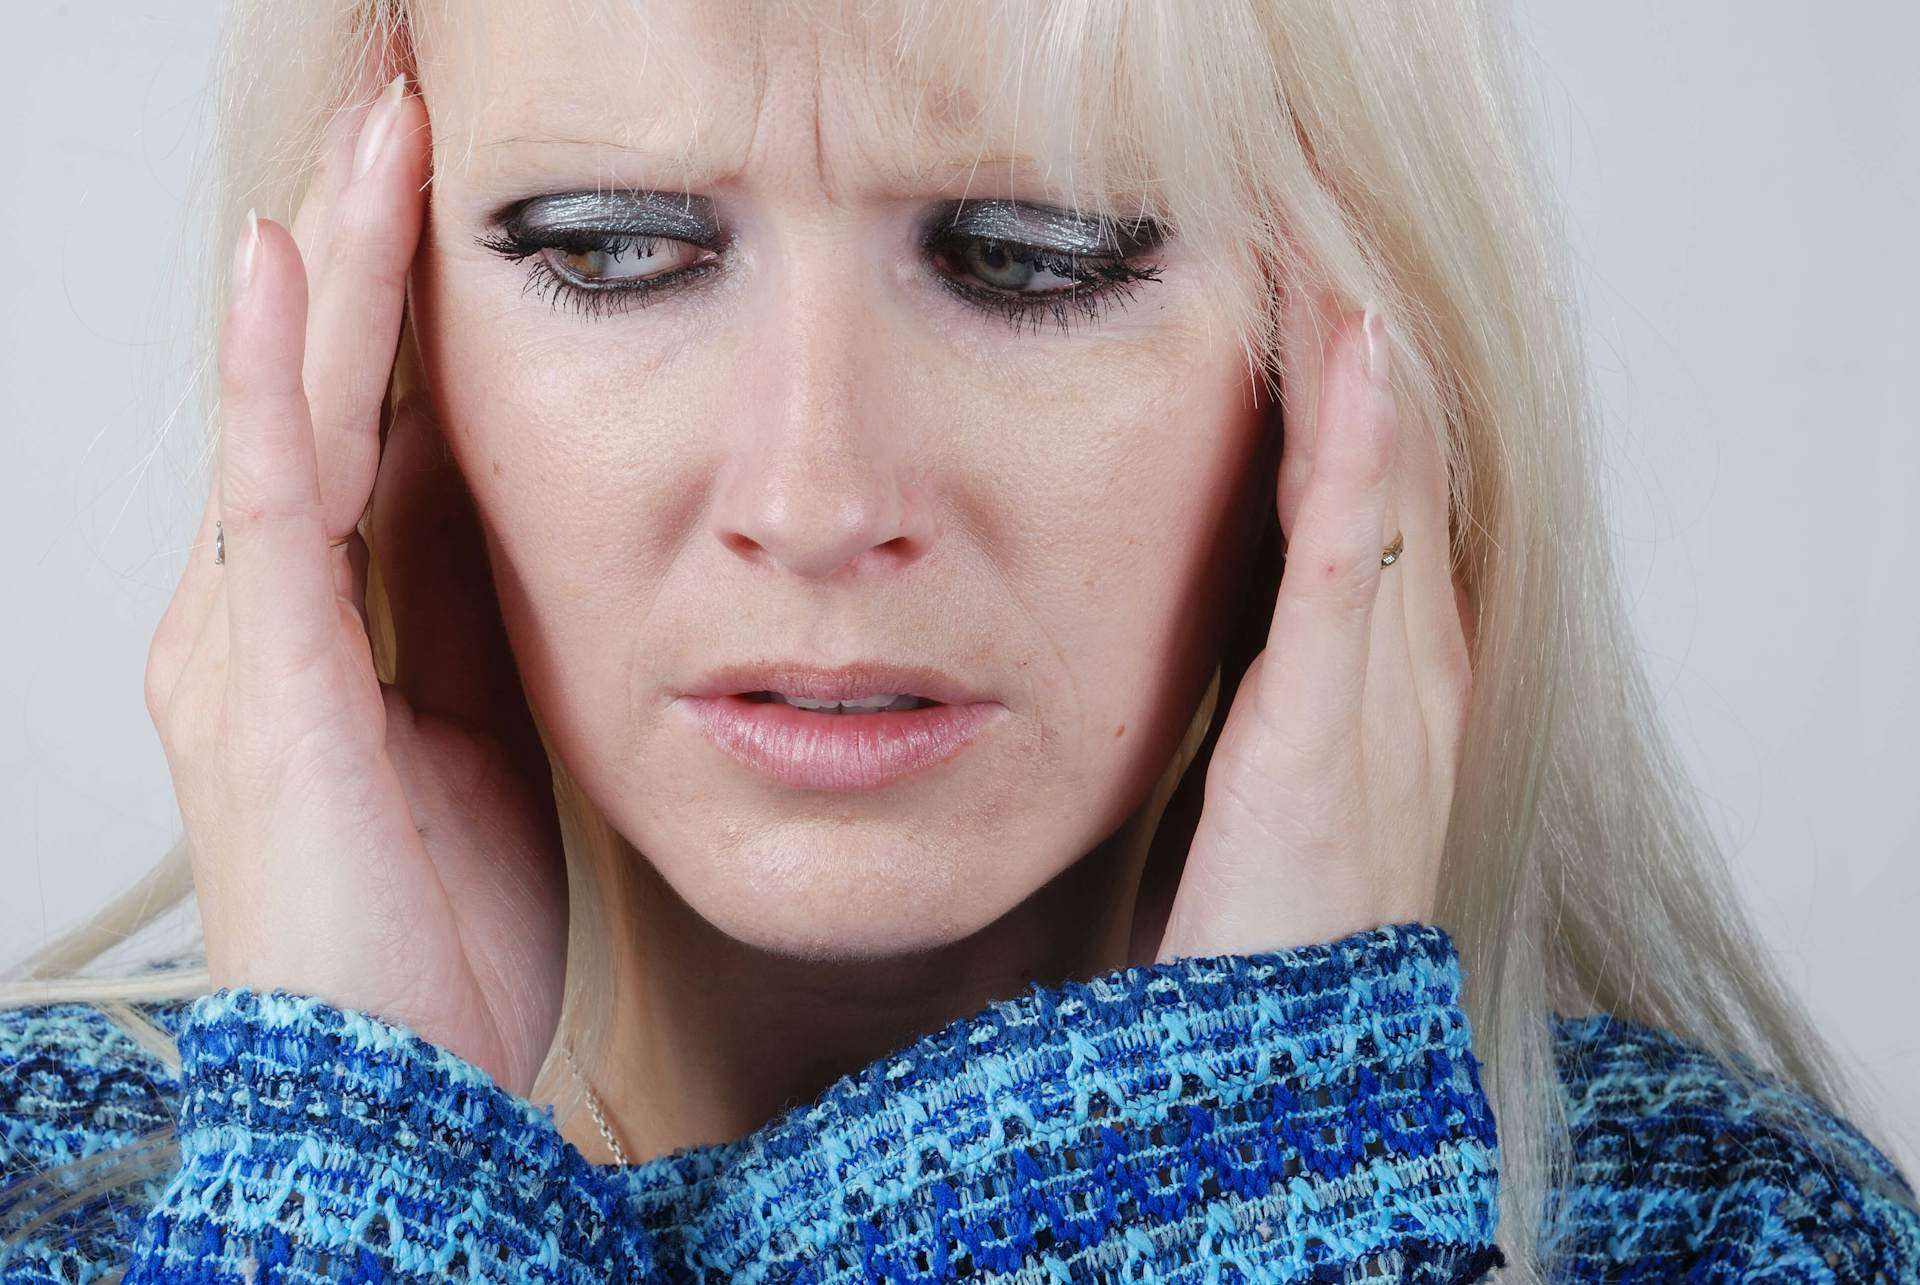 Nutritional Deficiencies Contribute to Migraine Headaches about Advanced Brain Power